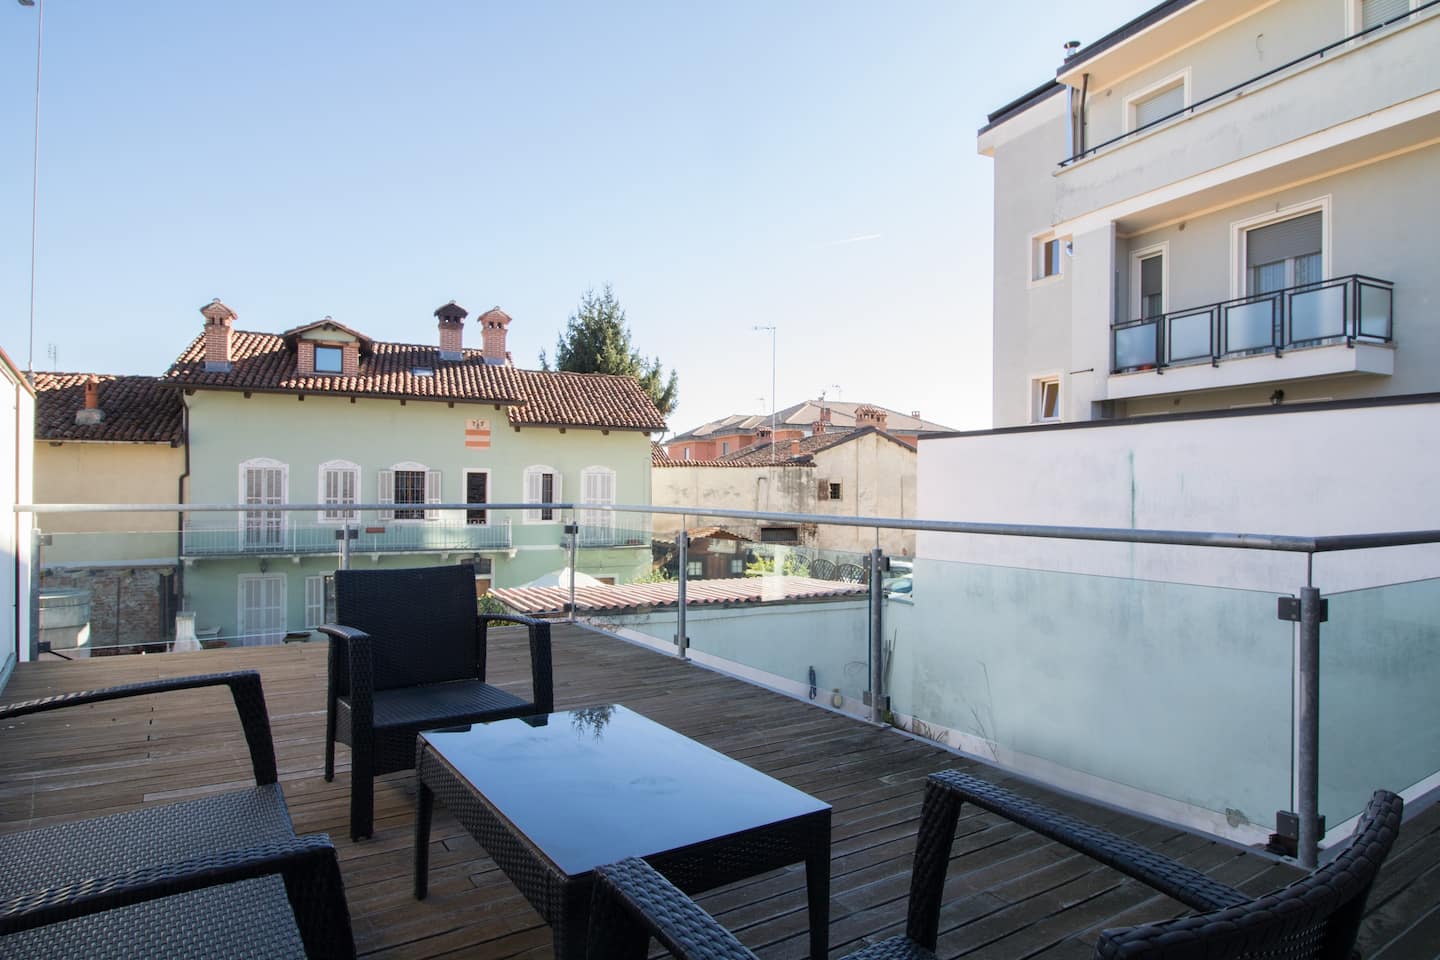 Large furnished terrace for an aperitif among the roof in La La Land House, Vayadù flat in Genola